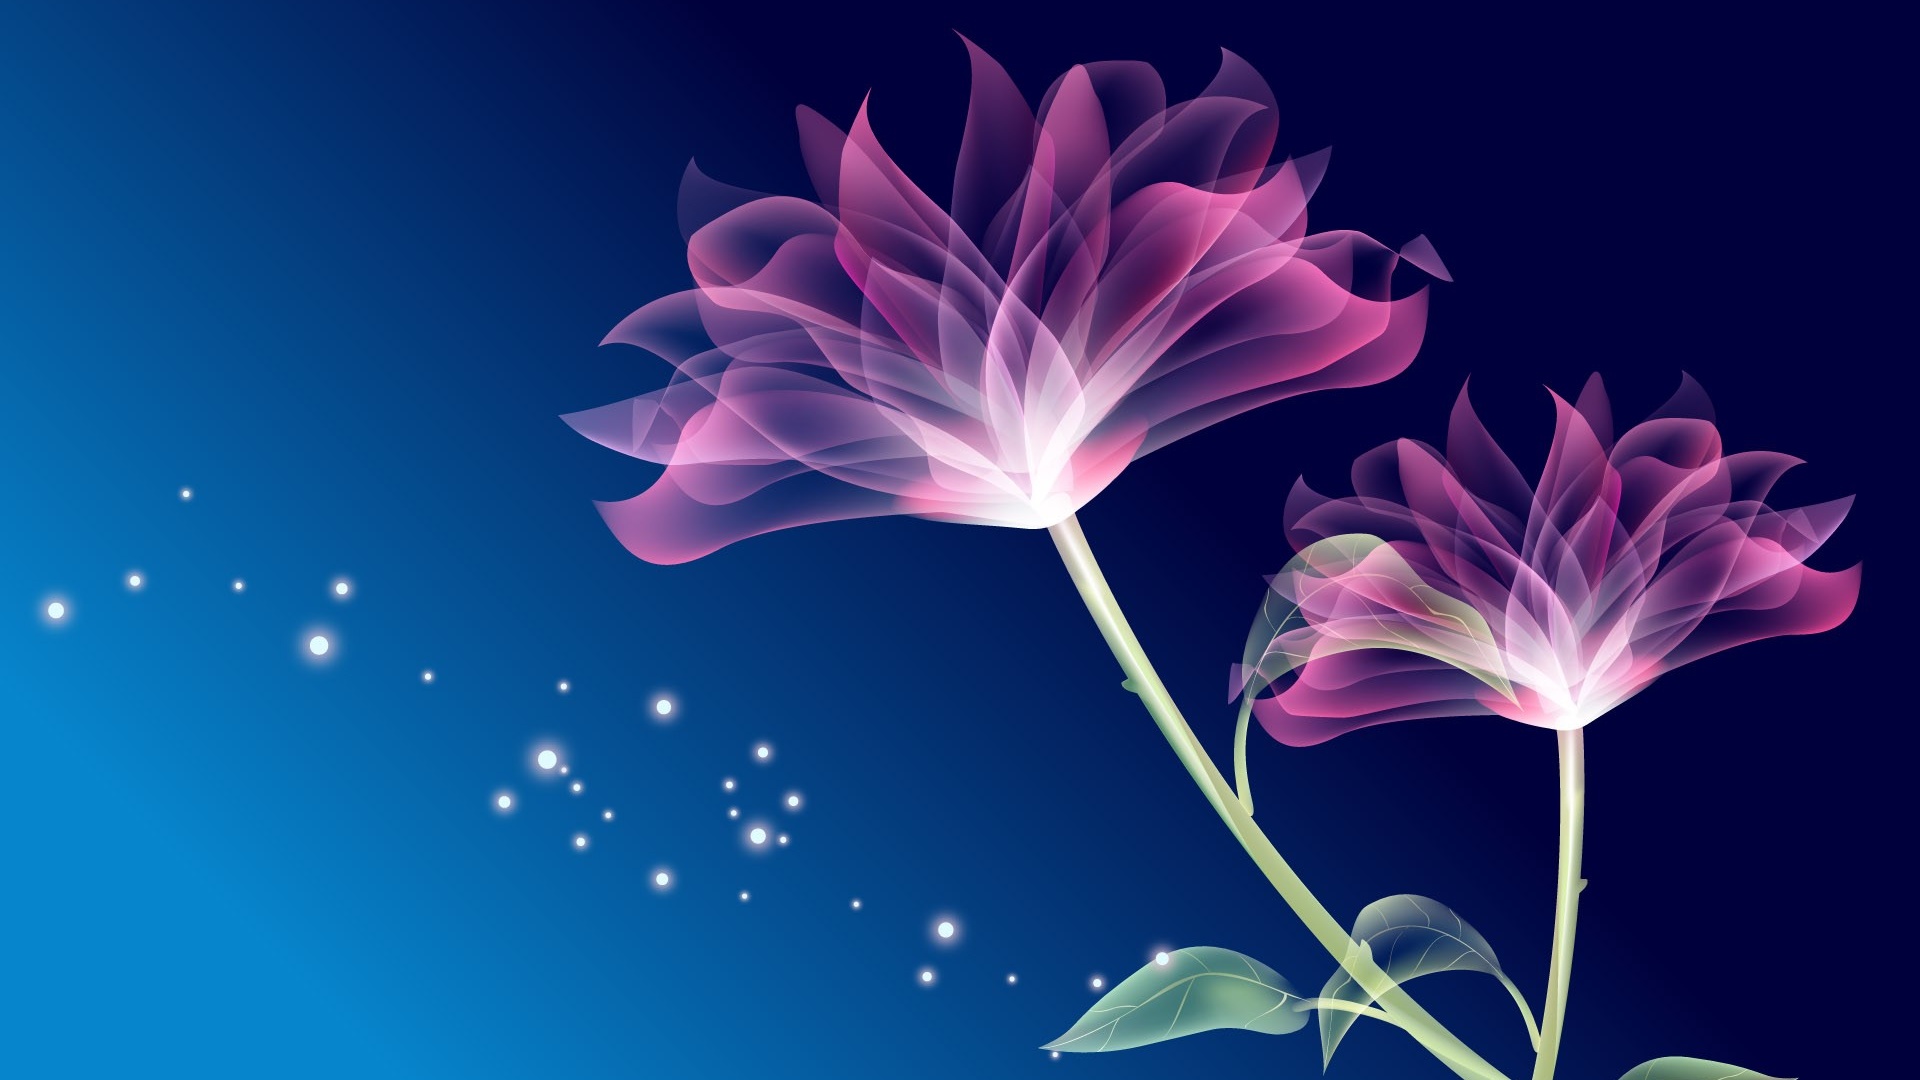 HD Magic Wallpapers and Photos | HD Flowers Wallpapers